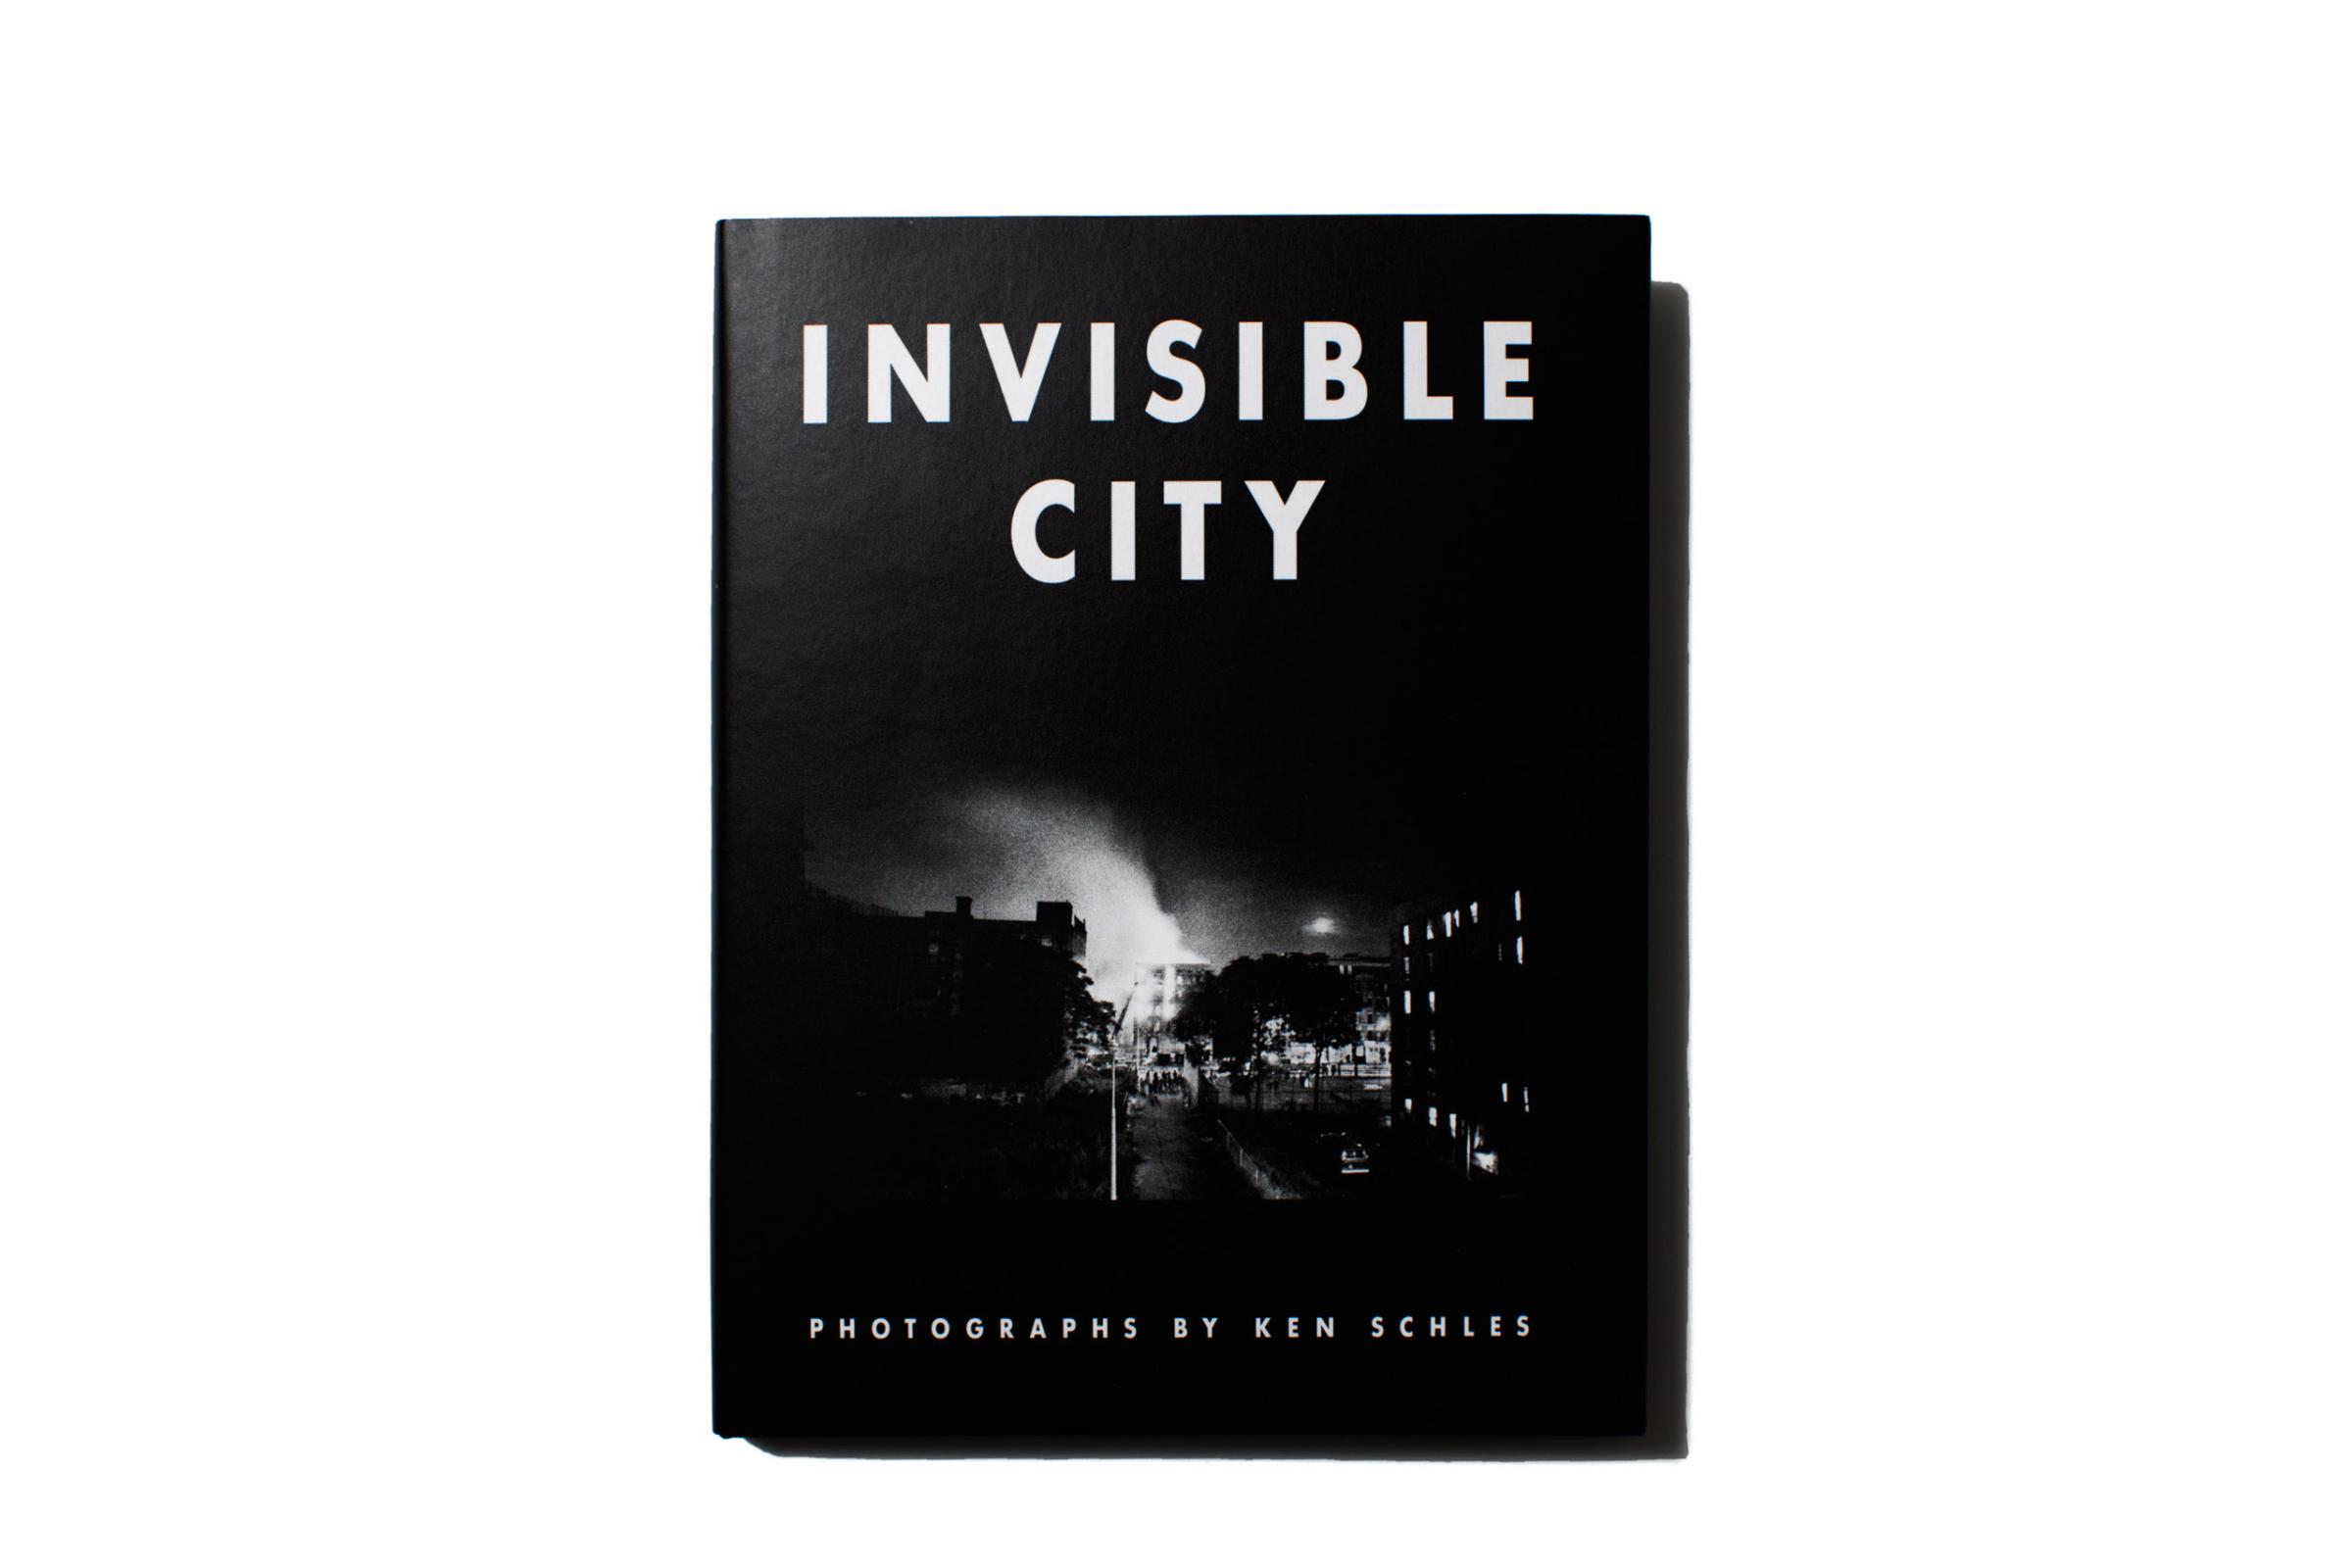 Invisible City byKen Schles, published bySteidl,selected by Michelle Molloy, International Photo Editor, TIME.